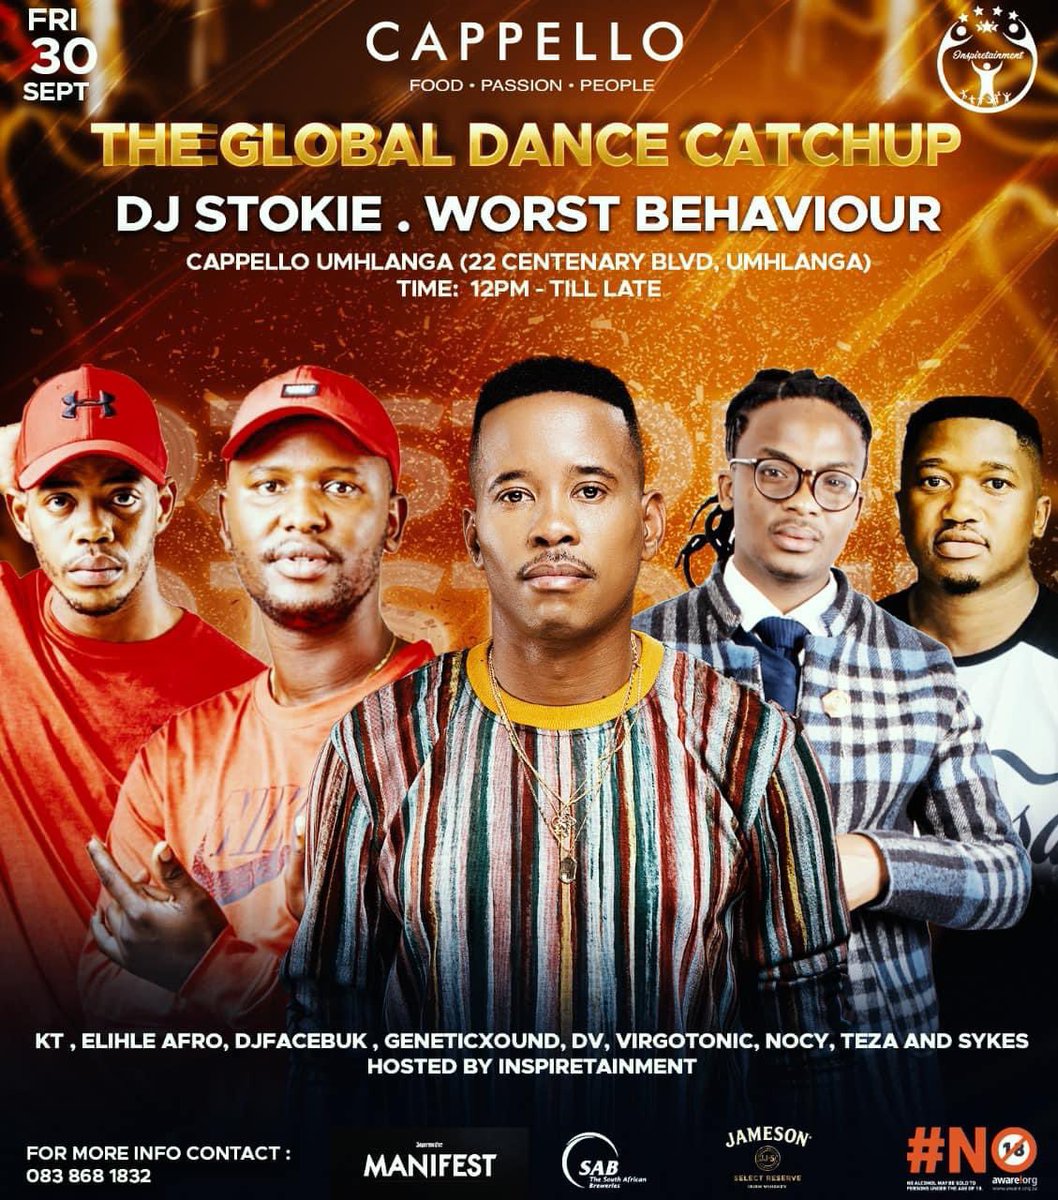 This Friday we out in Durban Capello, Umhlanga✅The Global Dance CatchUp✅Let’s goooo🔥🔥🔥🔥